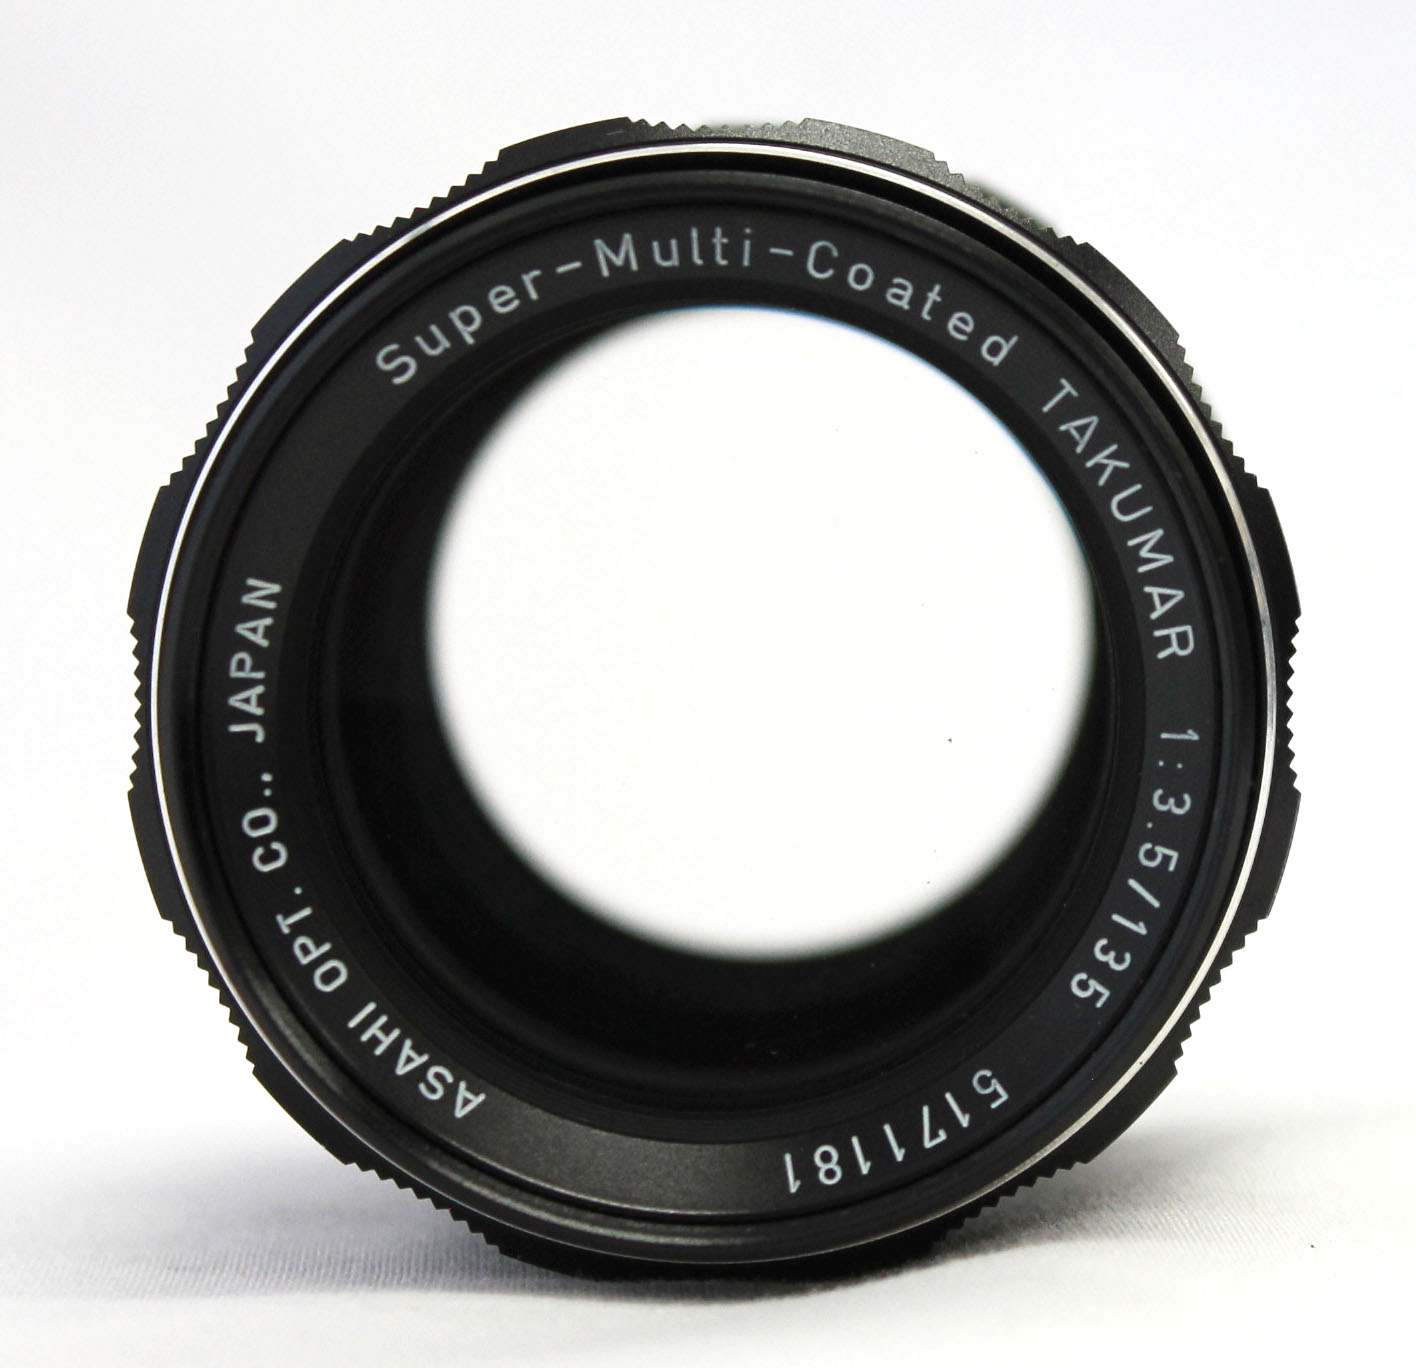  Asahi Pentax Super-Multi-Coated Takumar 135mm F/3.5 M42 Lens with Case from Japan Photo 6